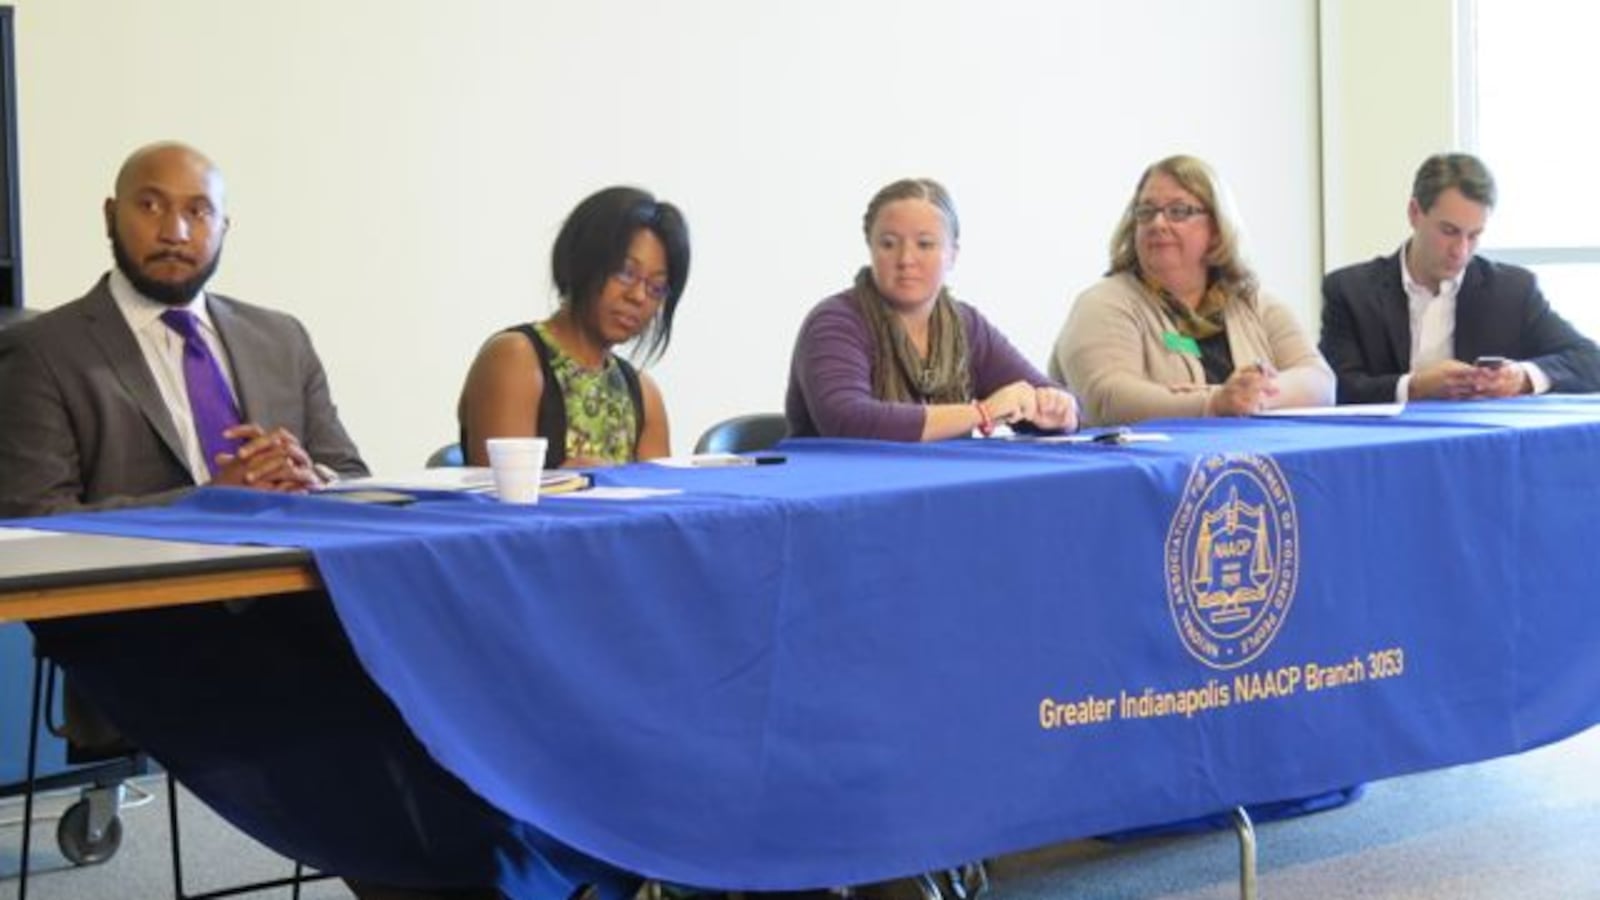 Five of the 10 candidates seeking election to the Indianapolis Public School Board sit at a candidate forum hosted by the Greater Indianapolis NAACP chapter.